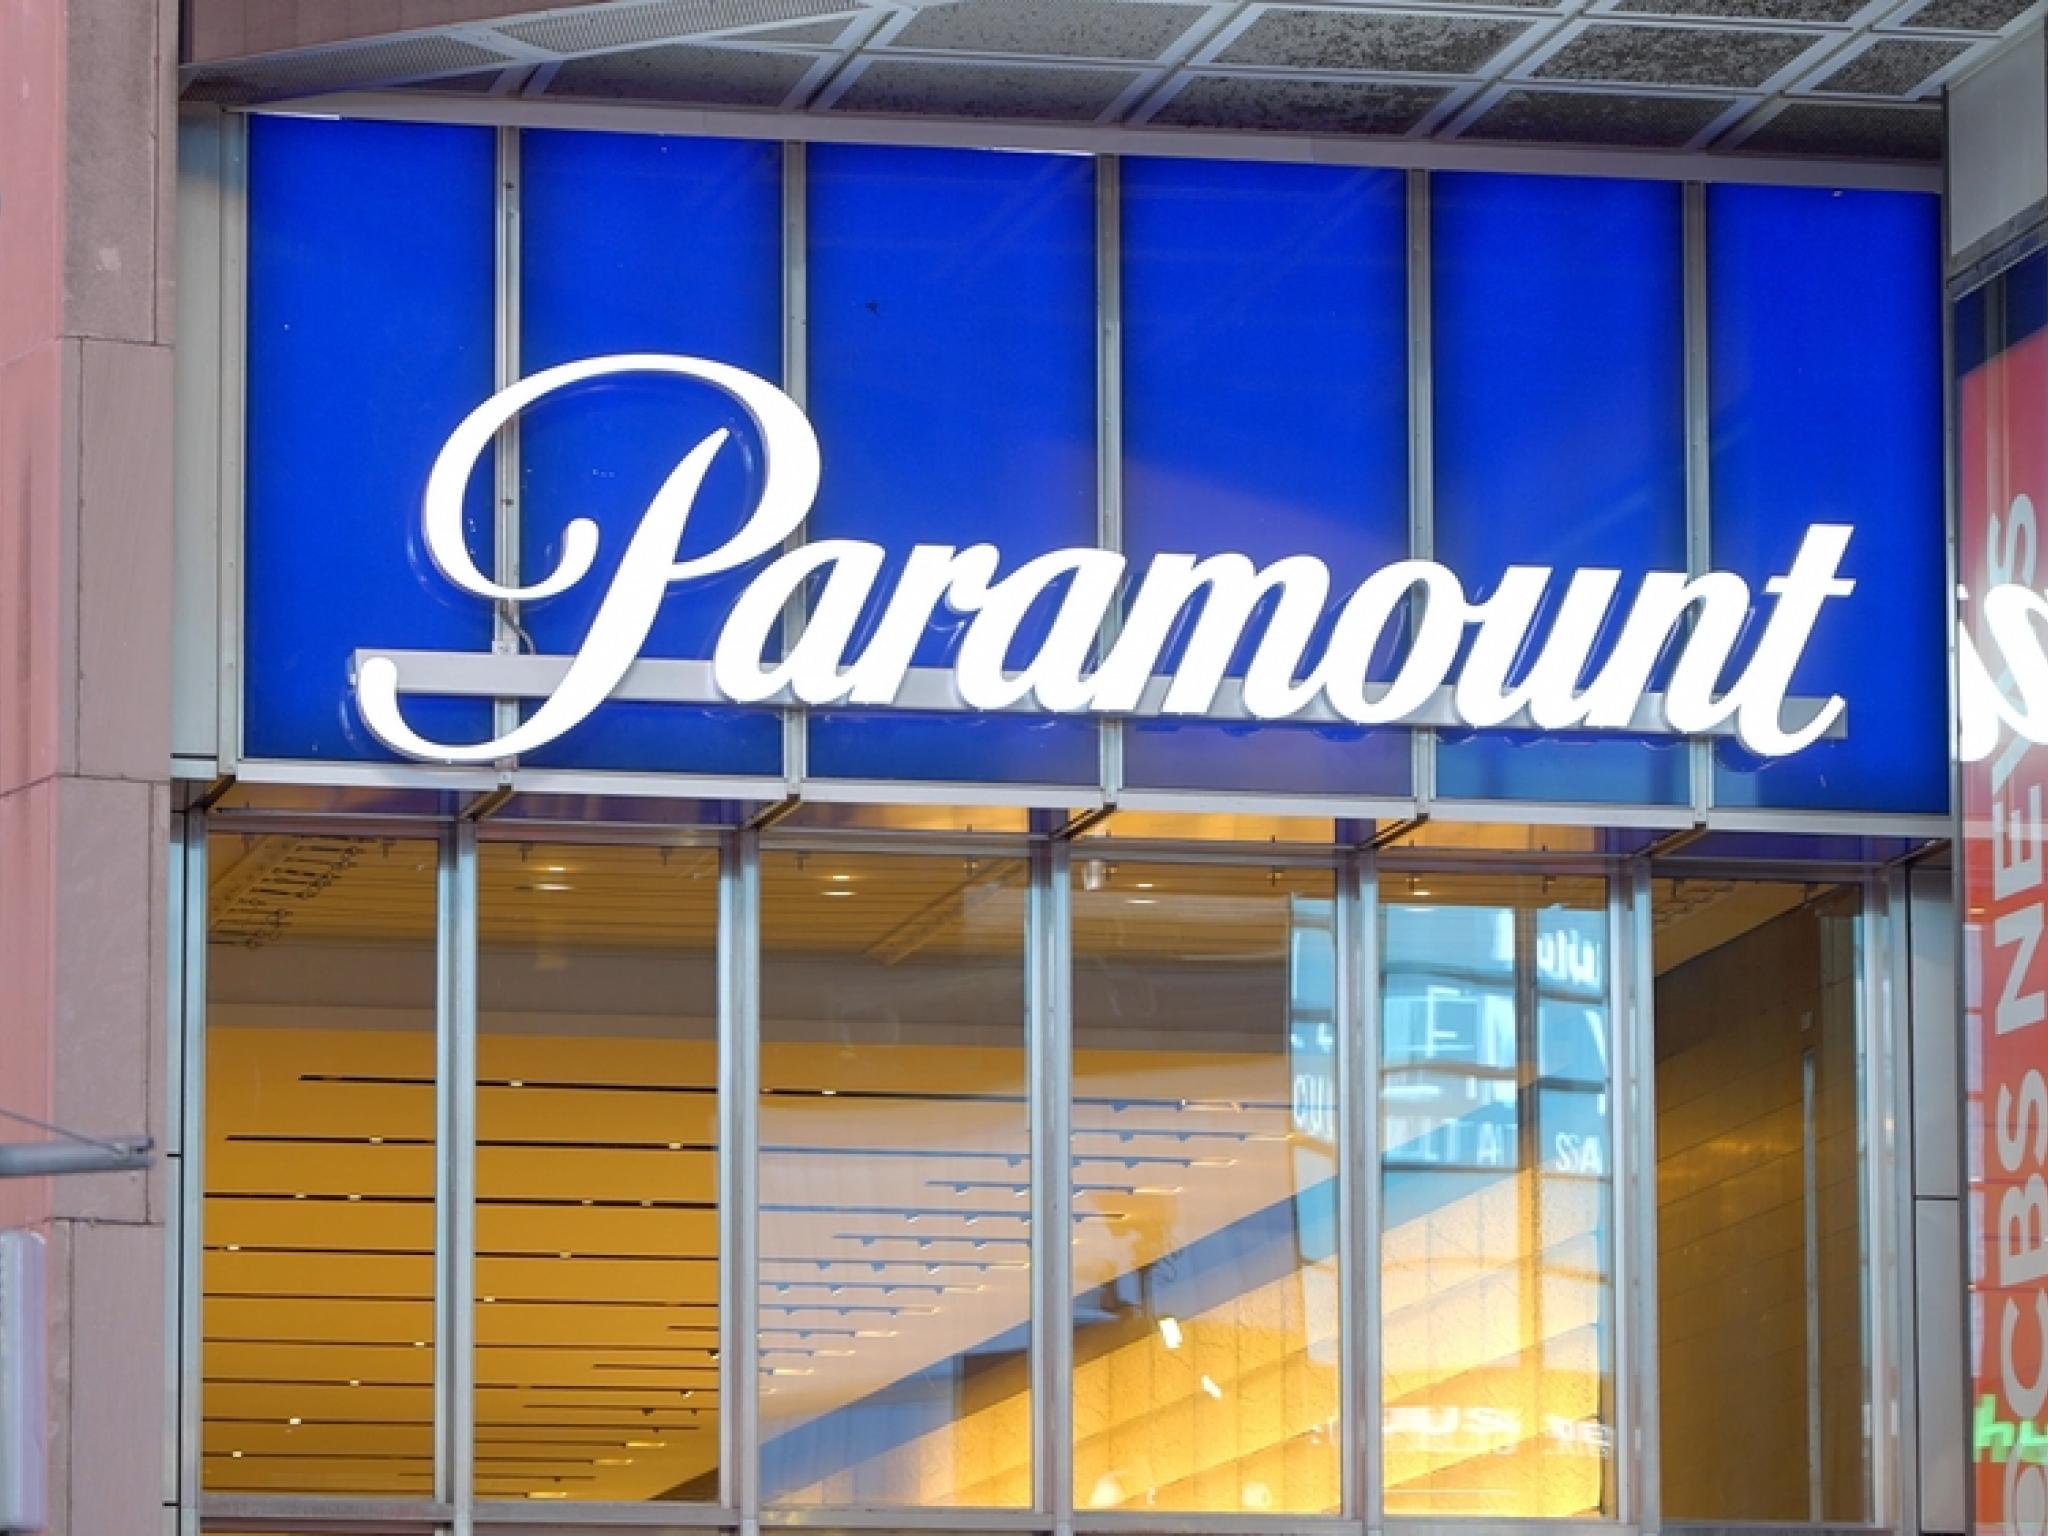  paramount-acquisition-in-doubt-as-sony-rethinks-26b-bid 